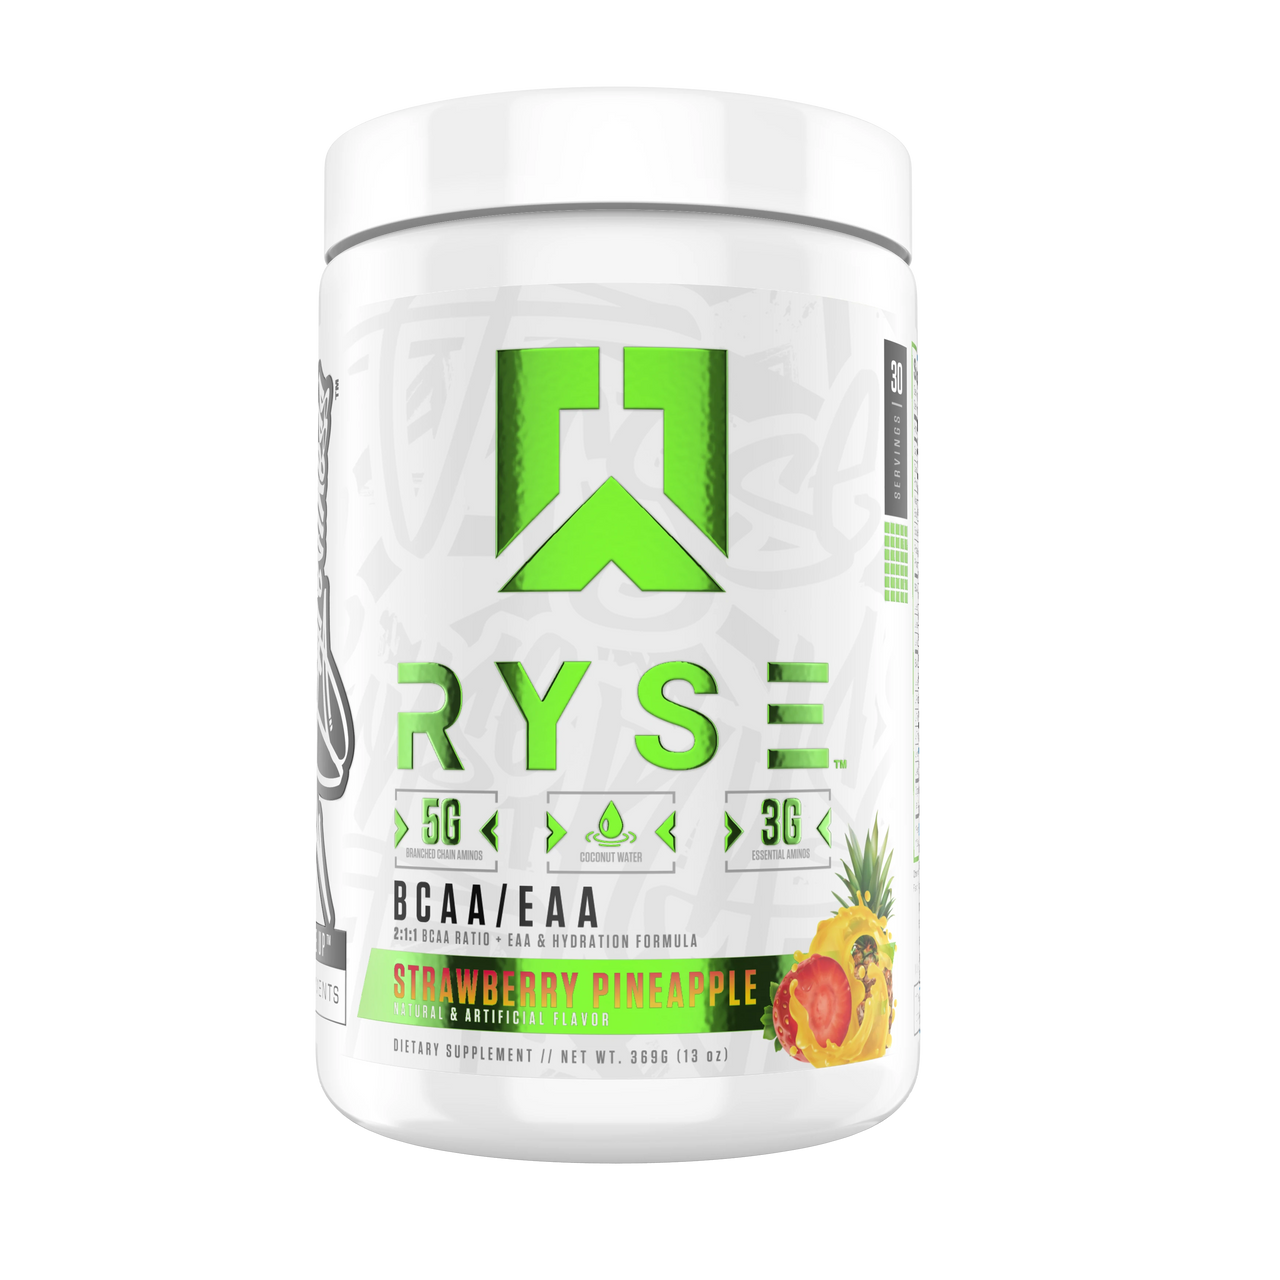 RYSE, Branched Chain Amino Acid, Best Online Supplements, Strawberry Pineapple Flavour, My Supplements